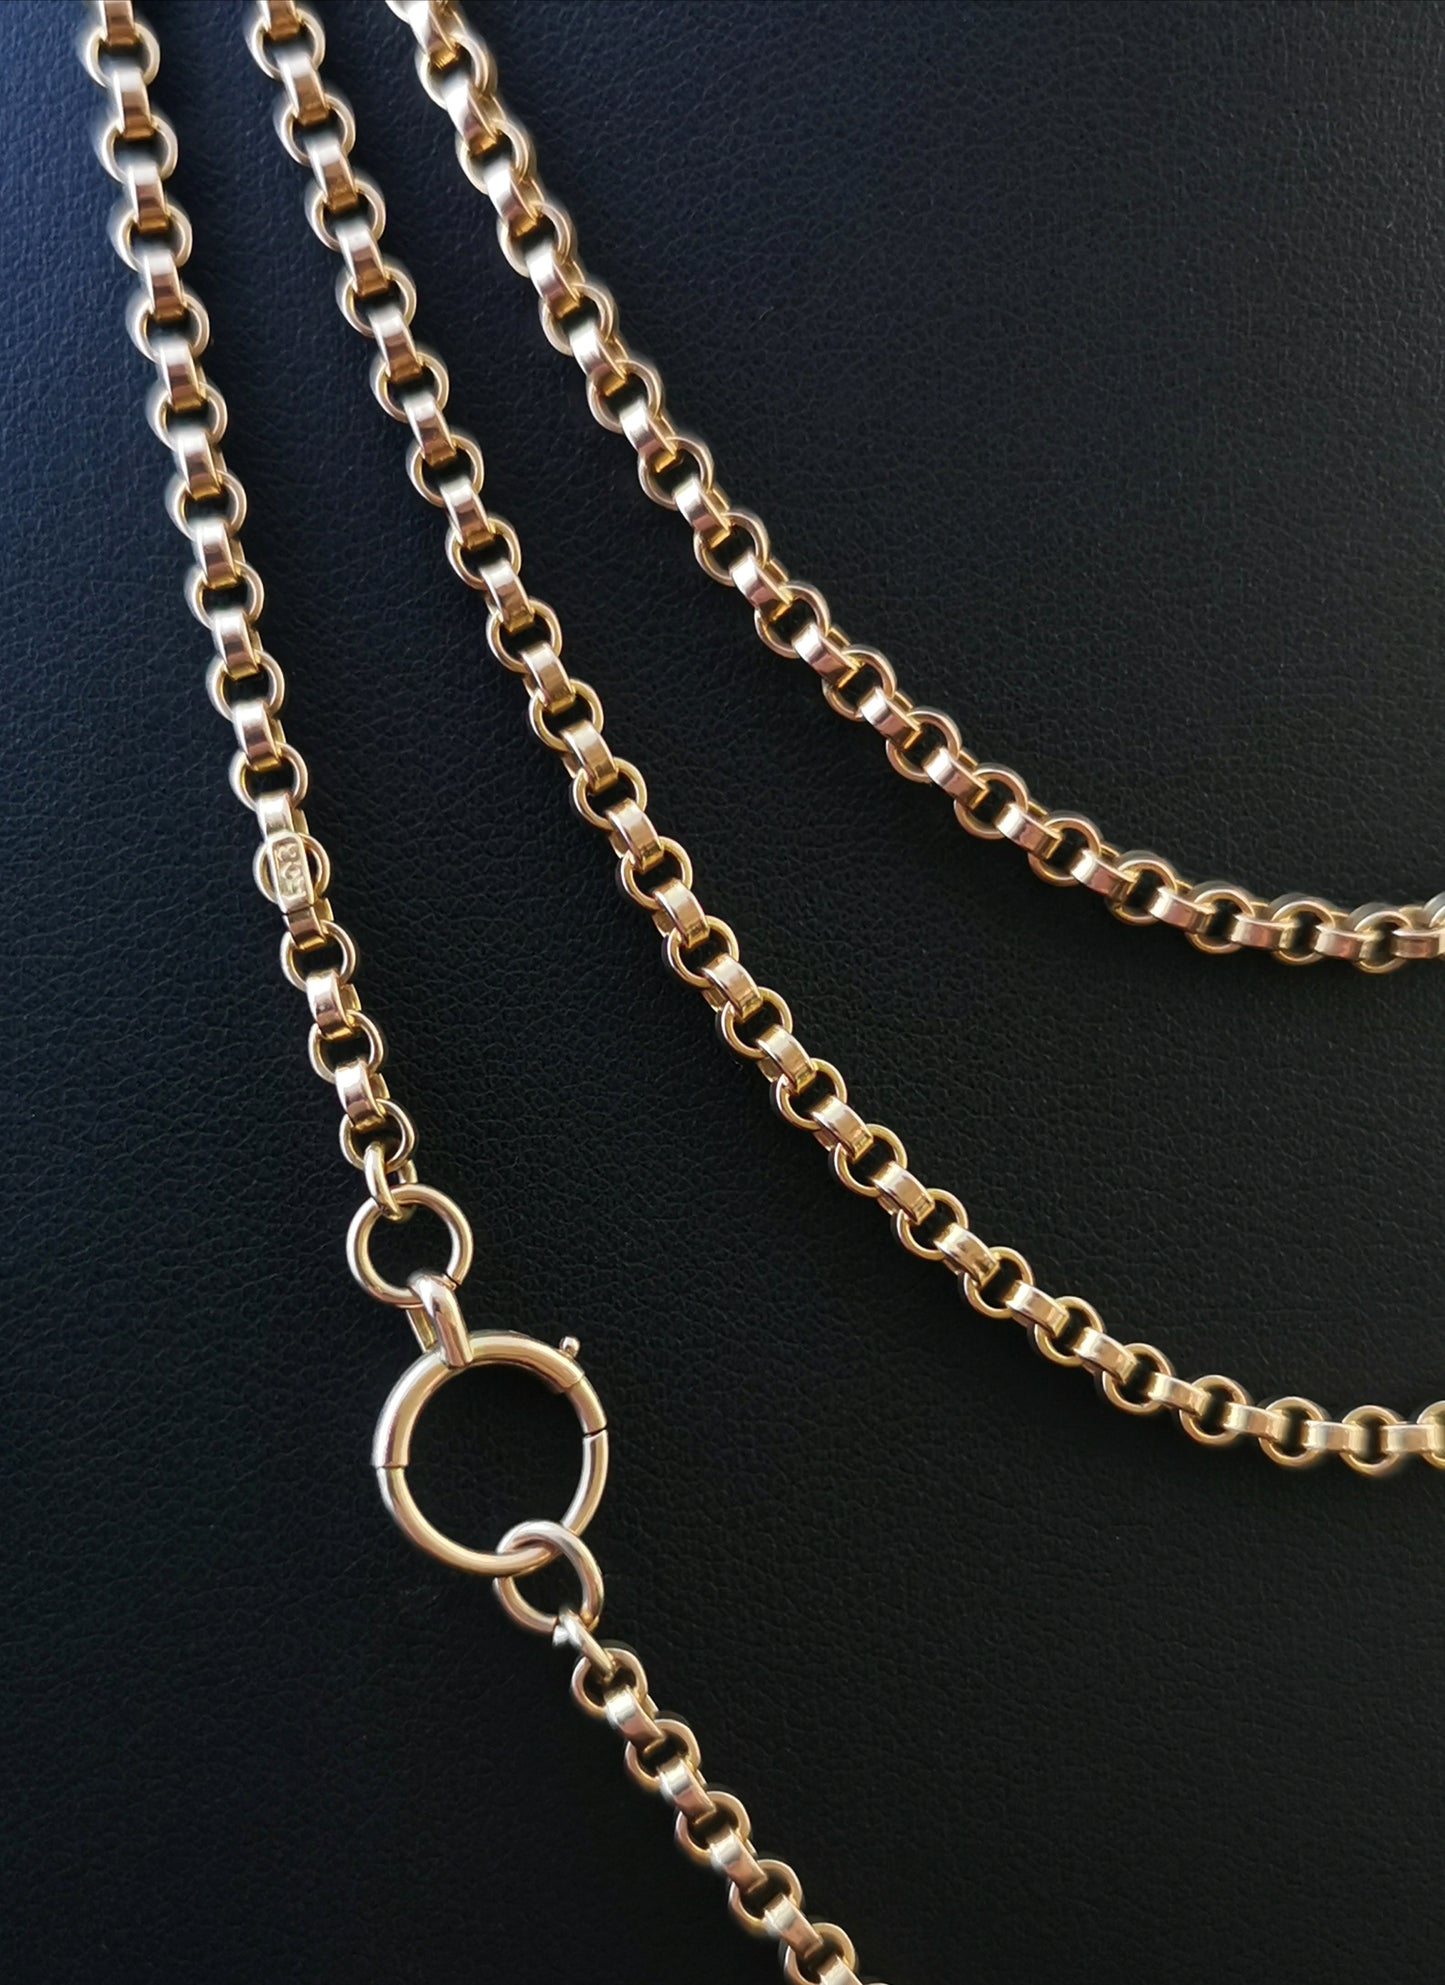 Antique Victorian 9ct gold longuard chain, muff chain necklace, Rolo link